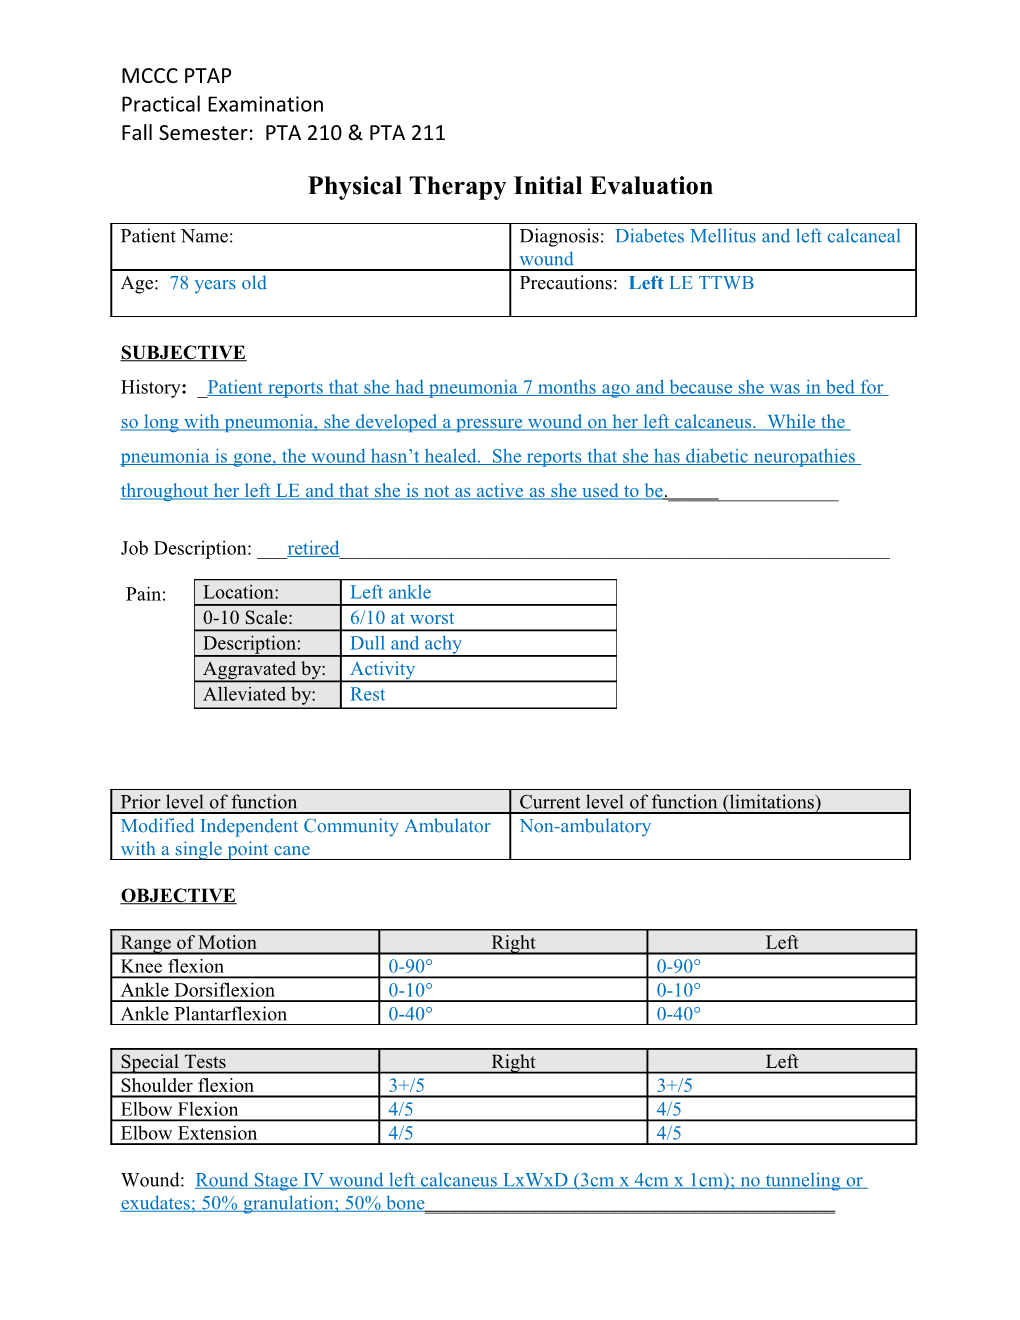 Physical Therapy Initial Evaluation